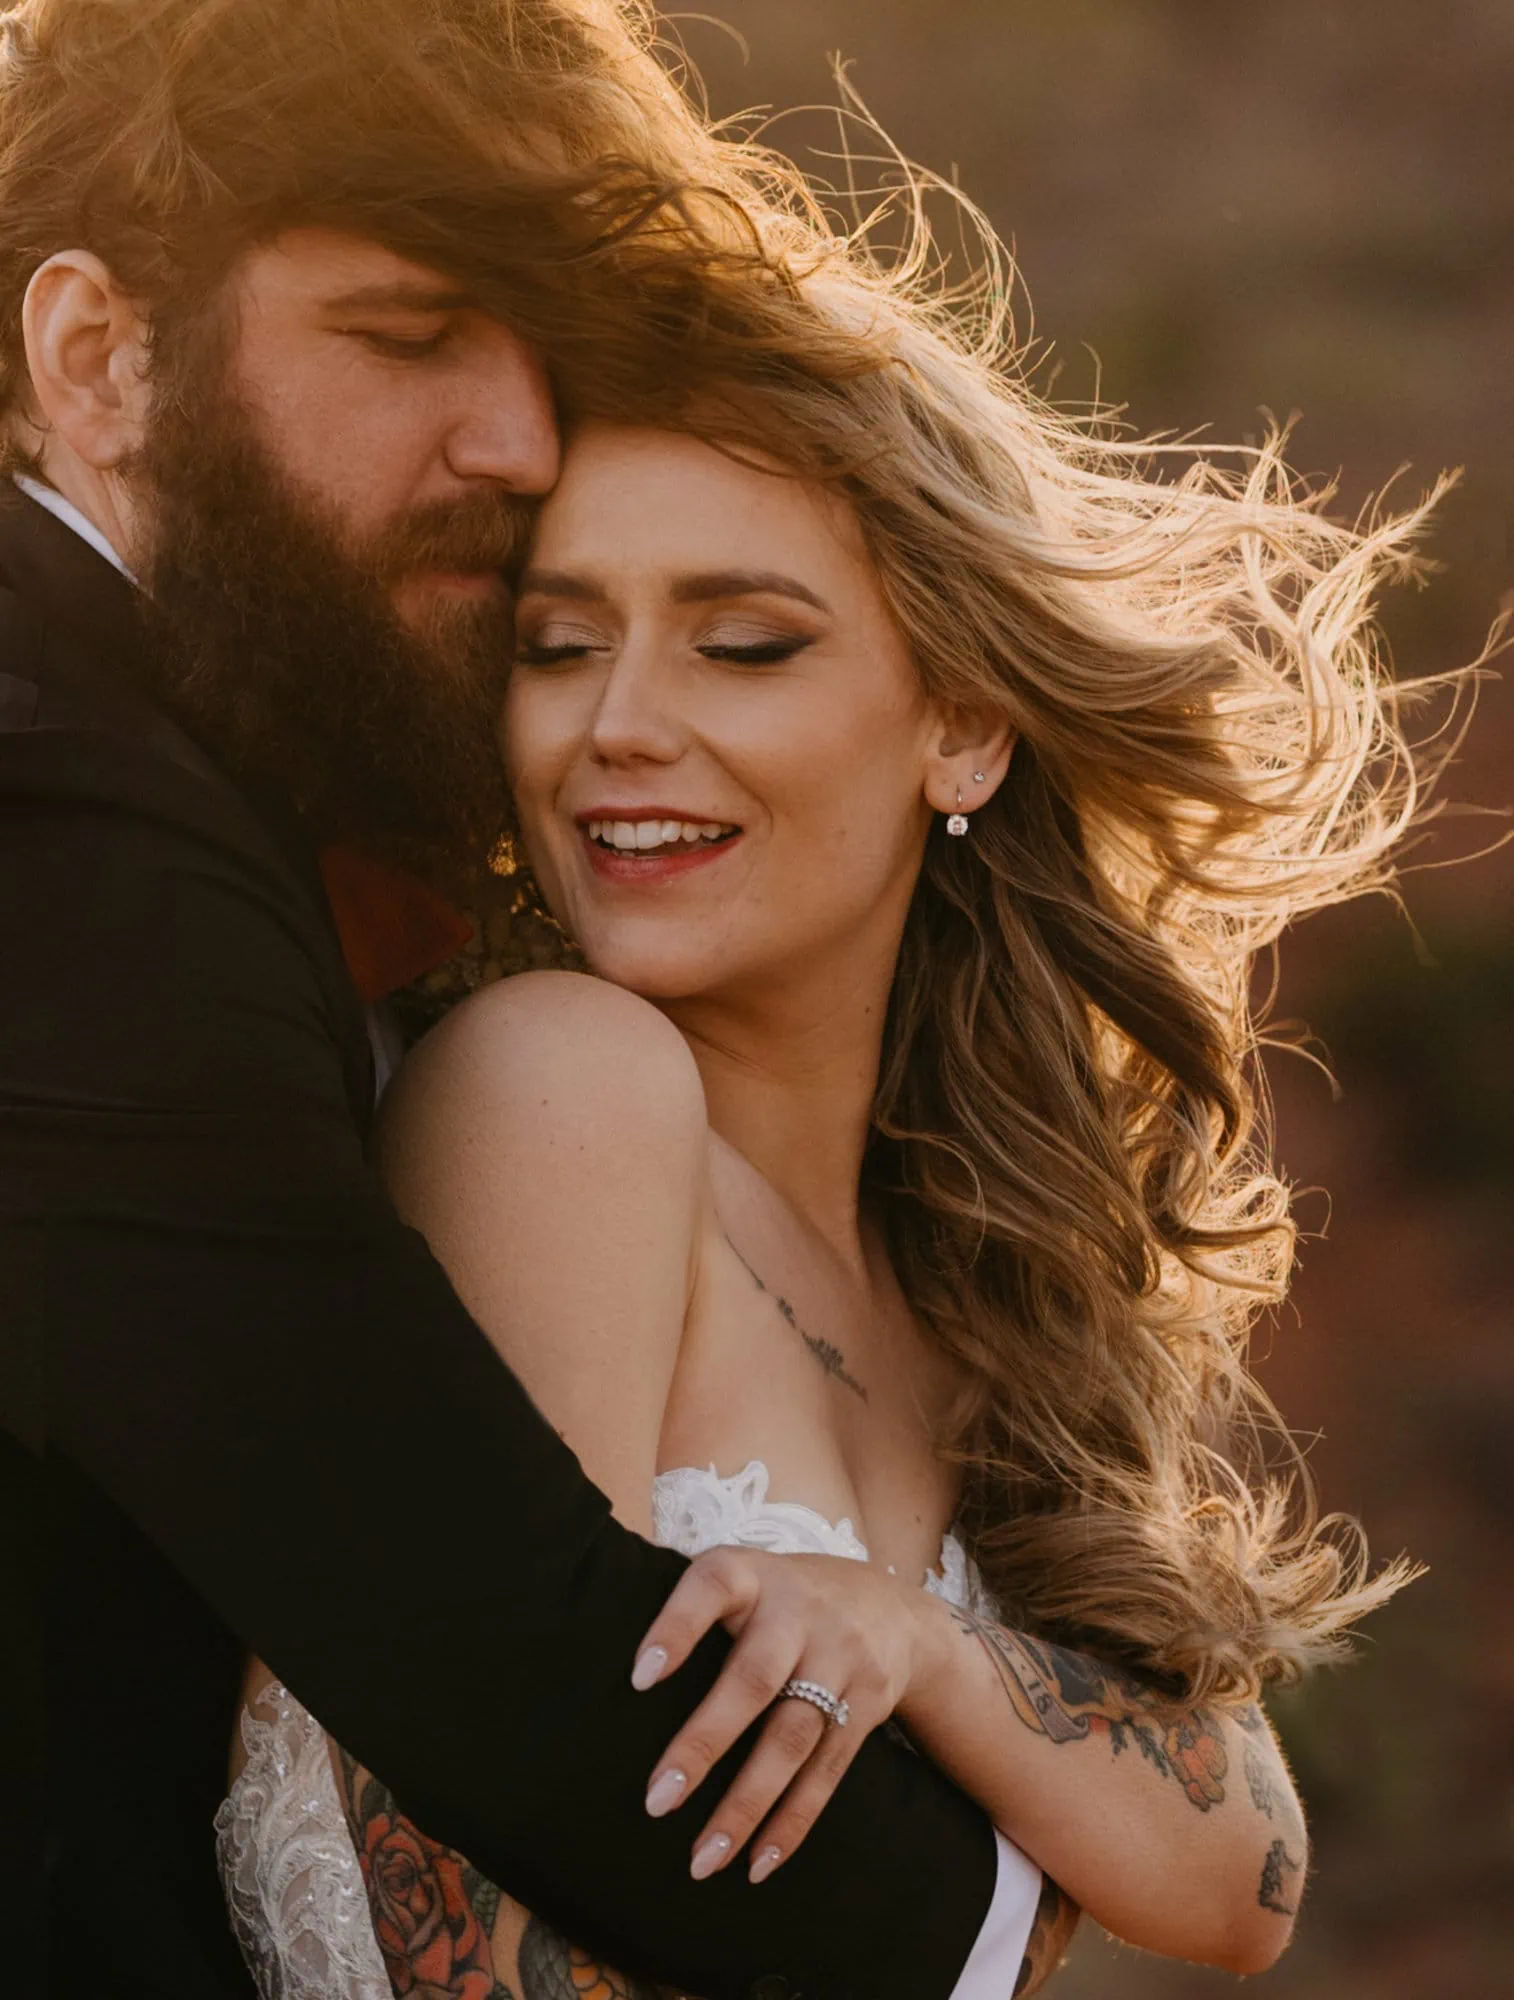 A bride holds her groom as wind sweeps their hair together.